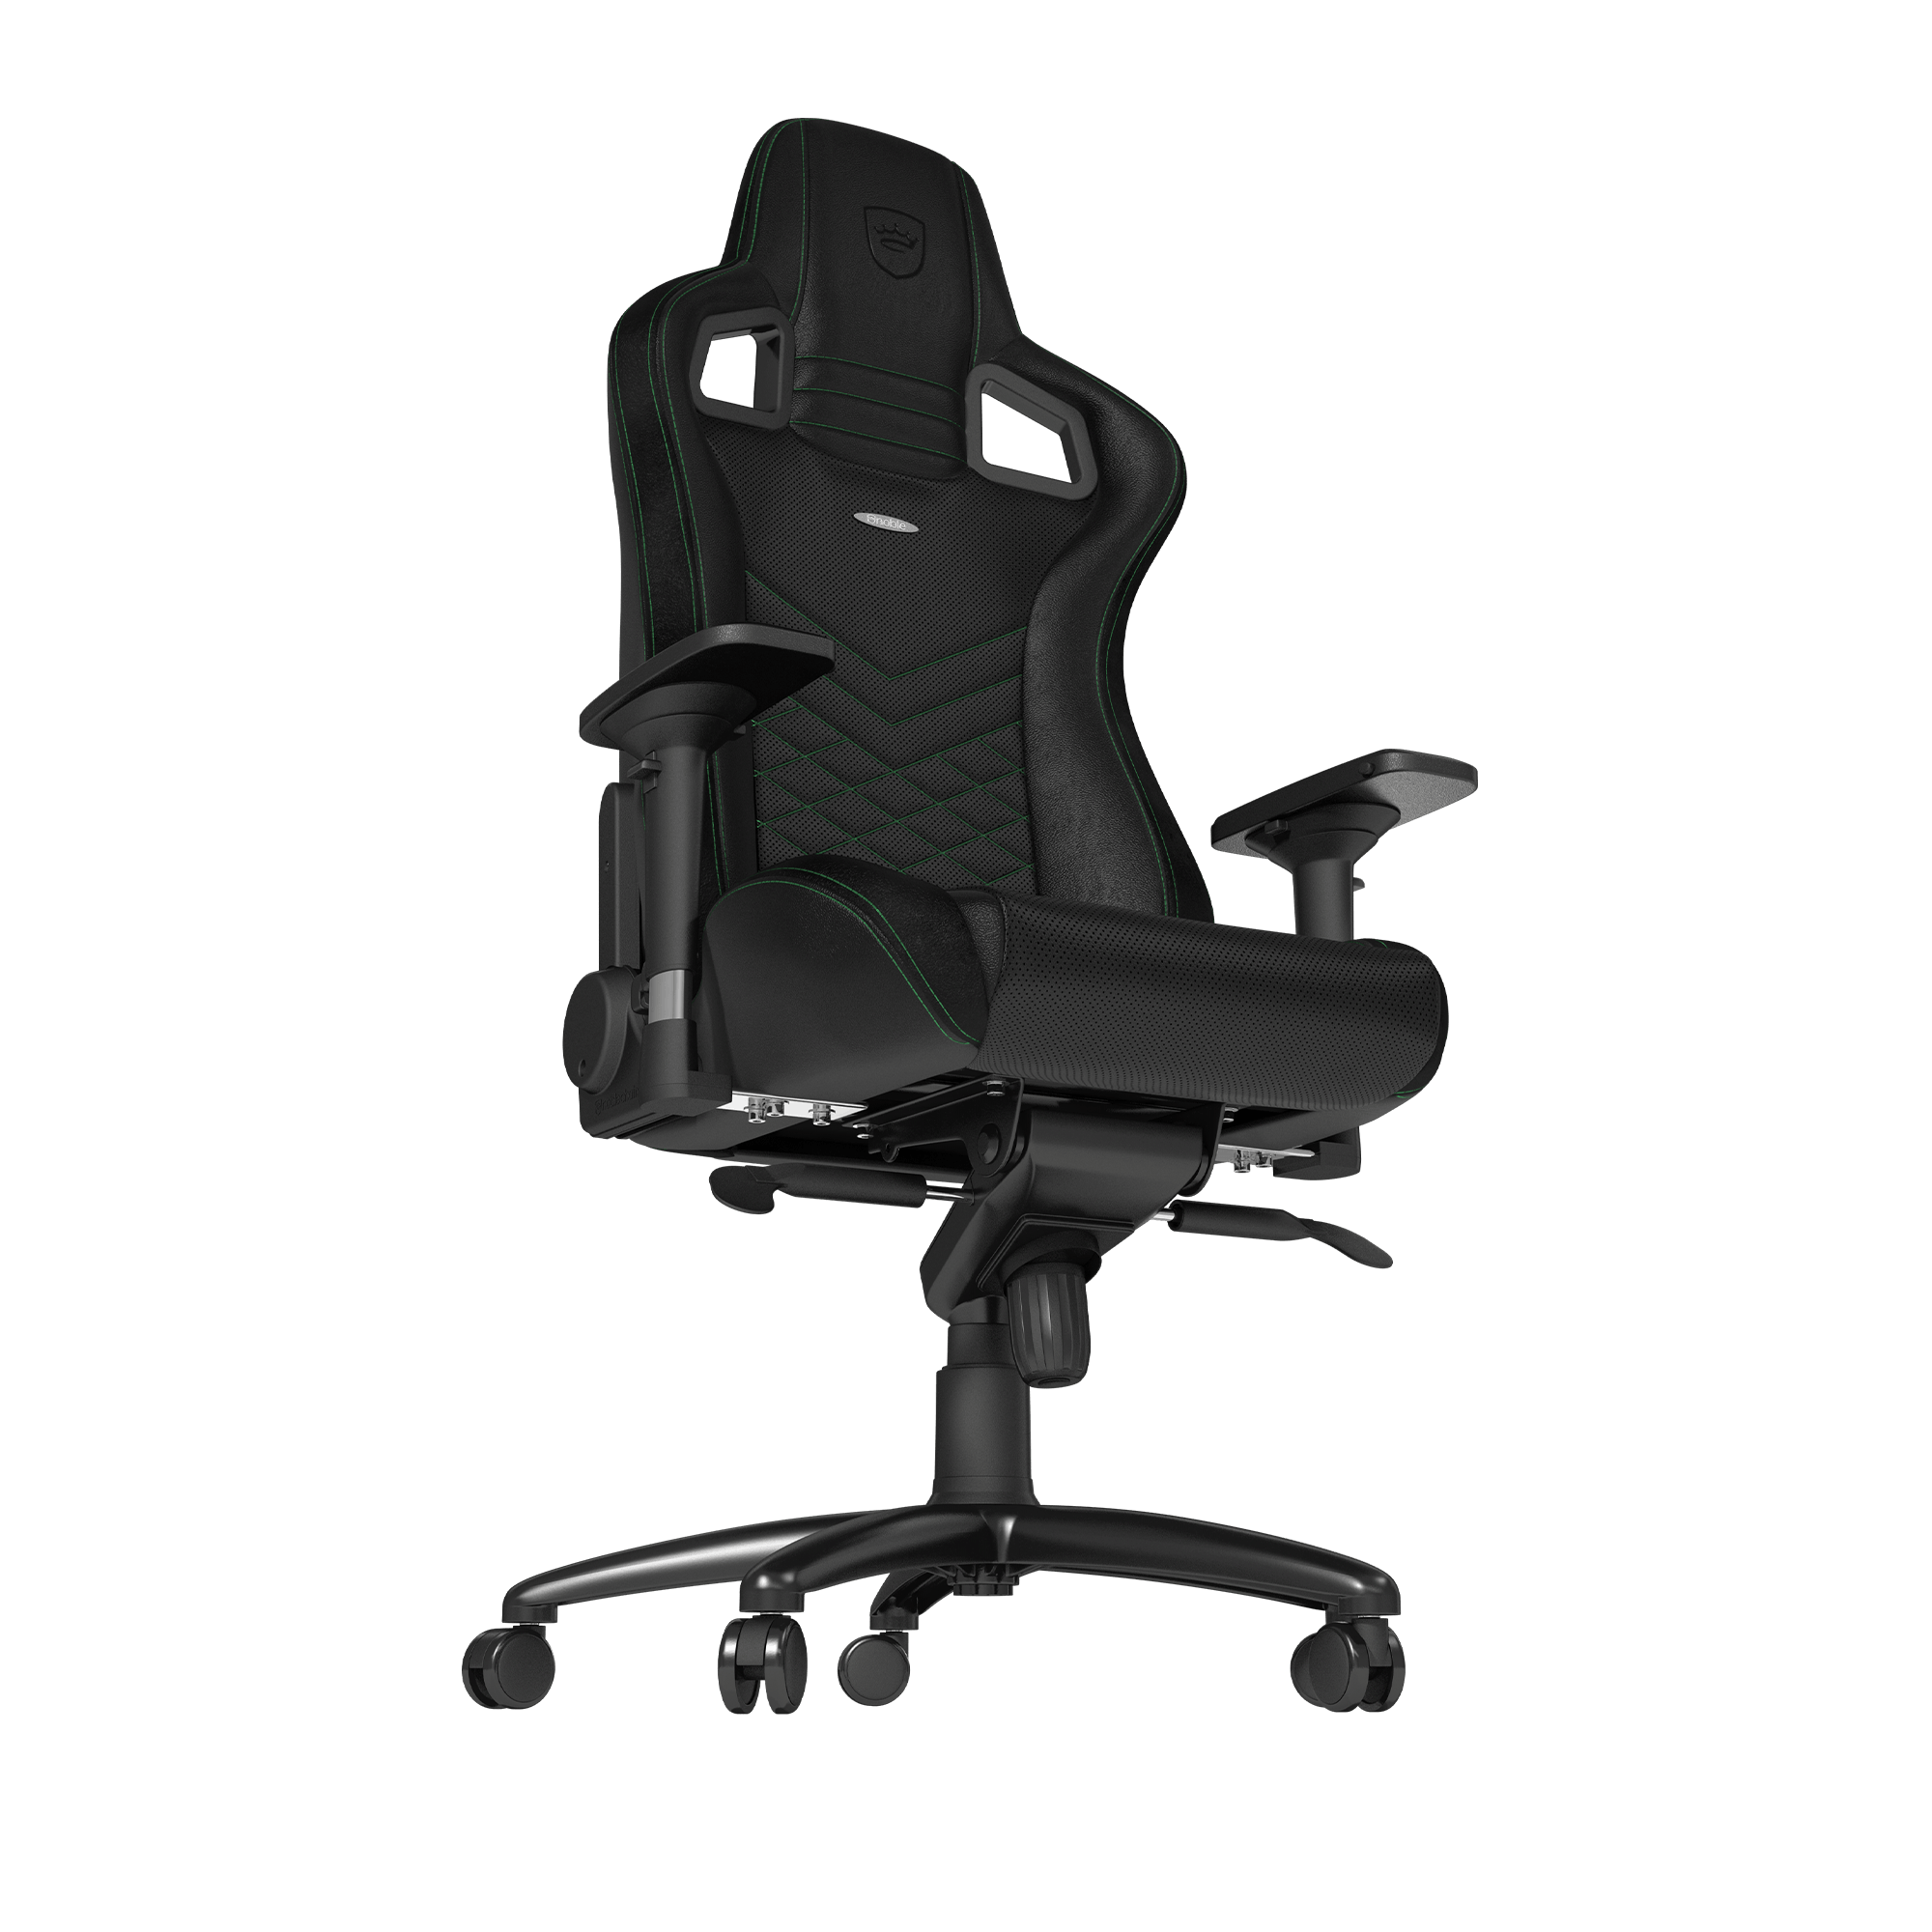 noblechairs - EPIC Black/Green